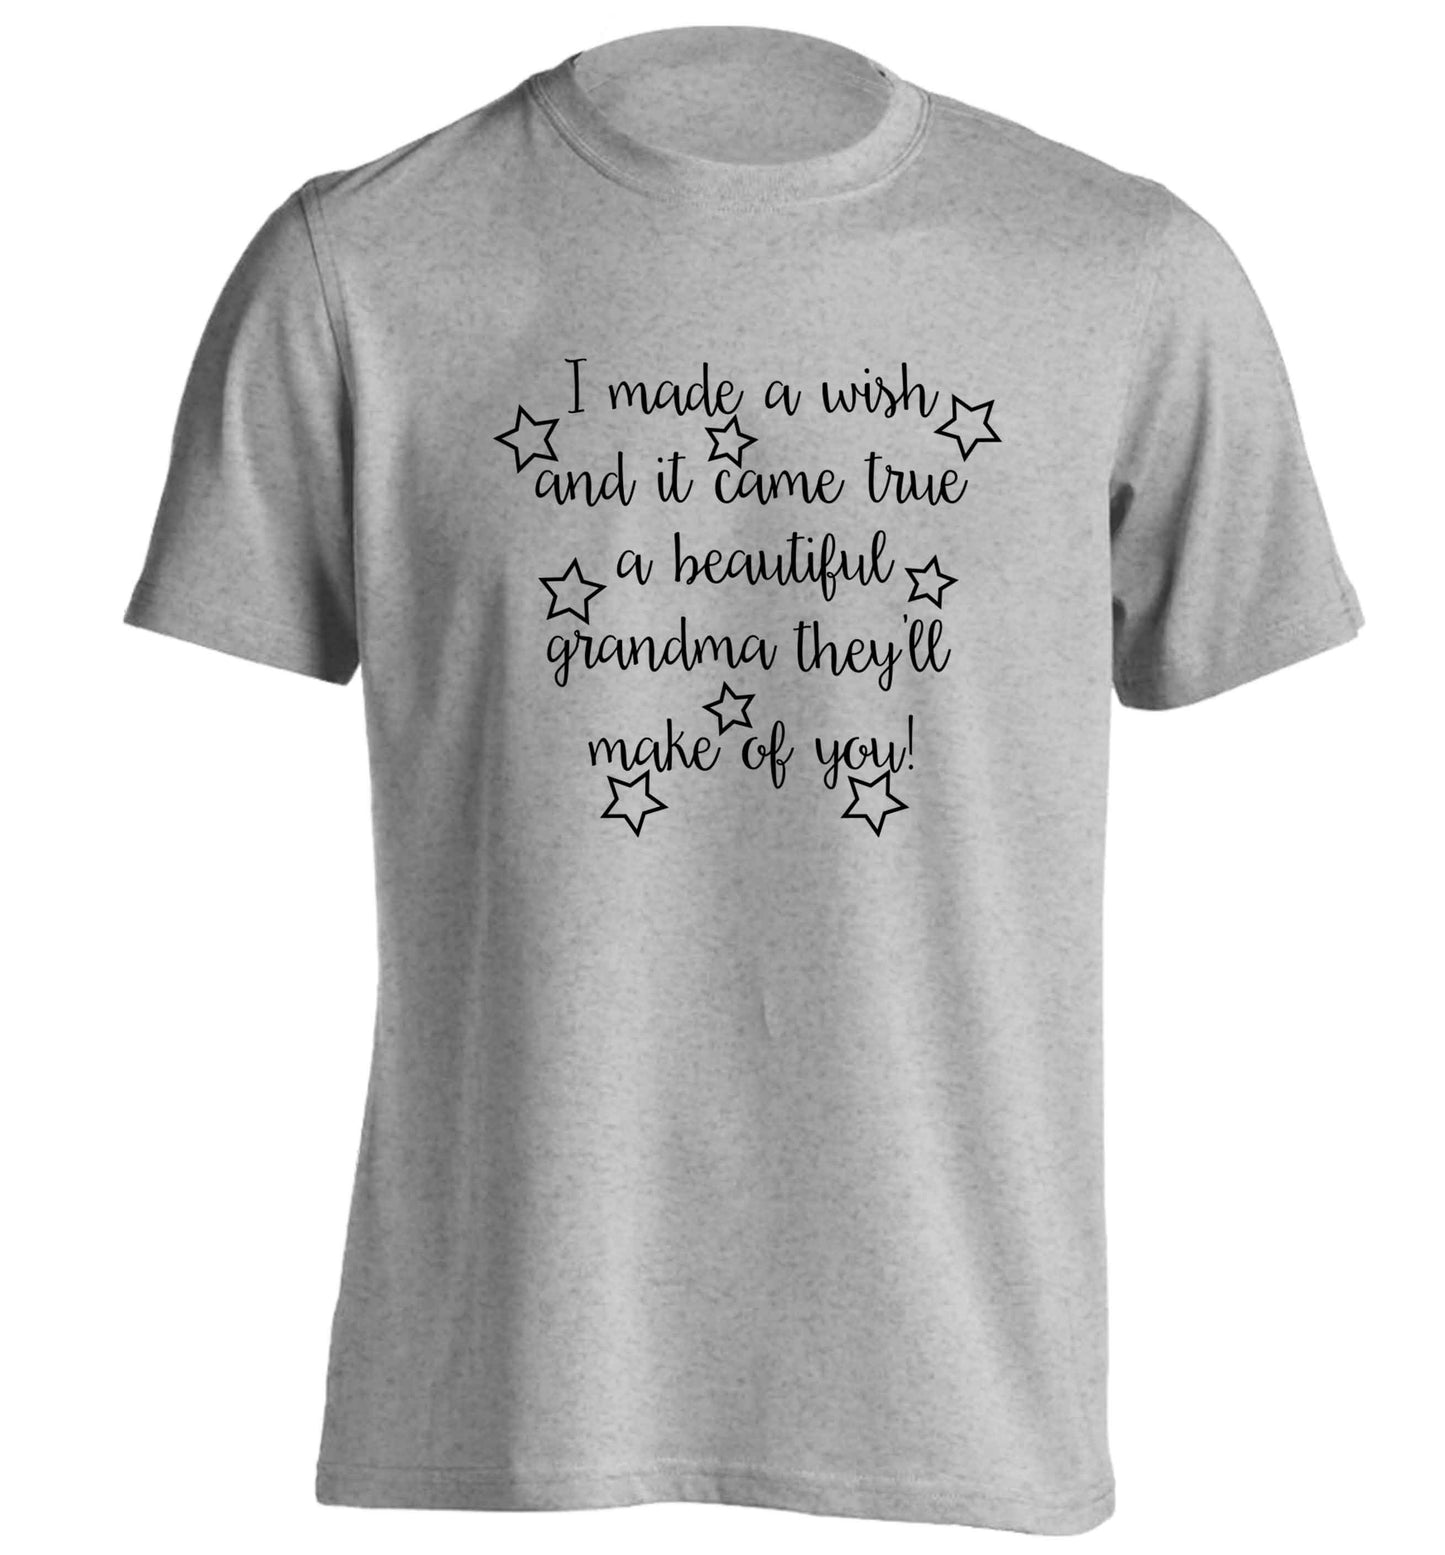 I made a wish and it came true a beautiful grandma they'll make of you! adults unisex grey Tshirt 2XL